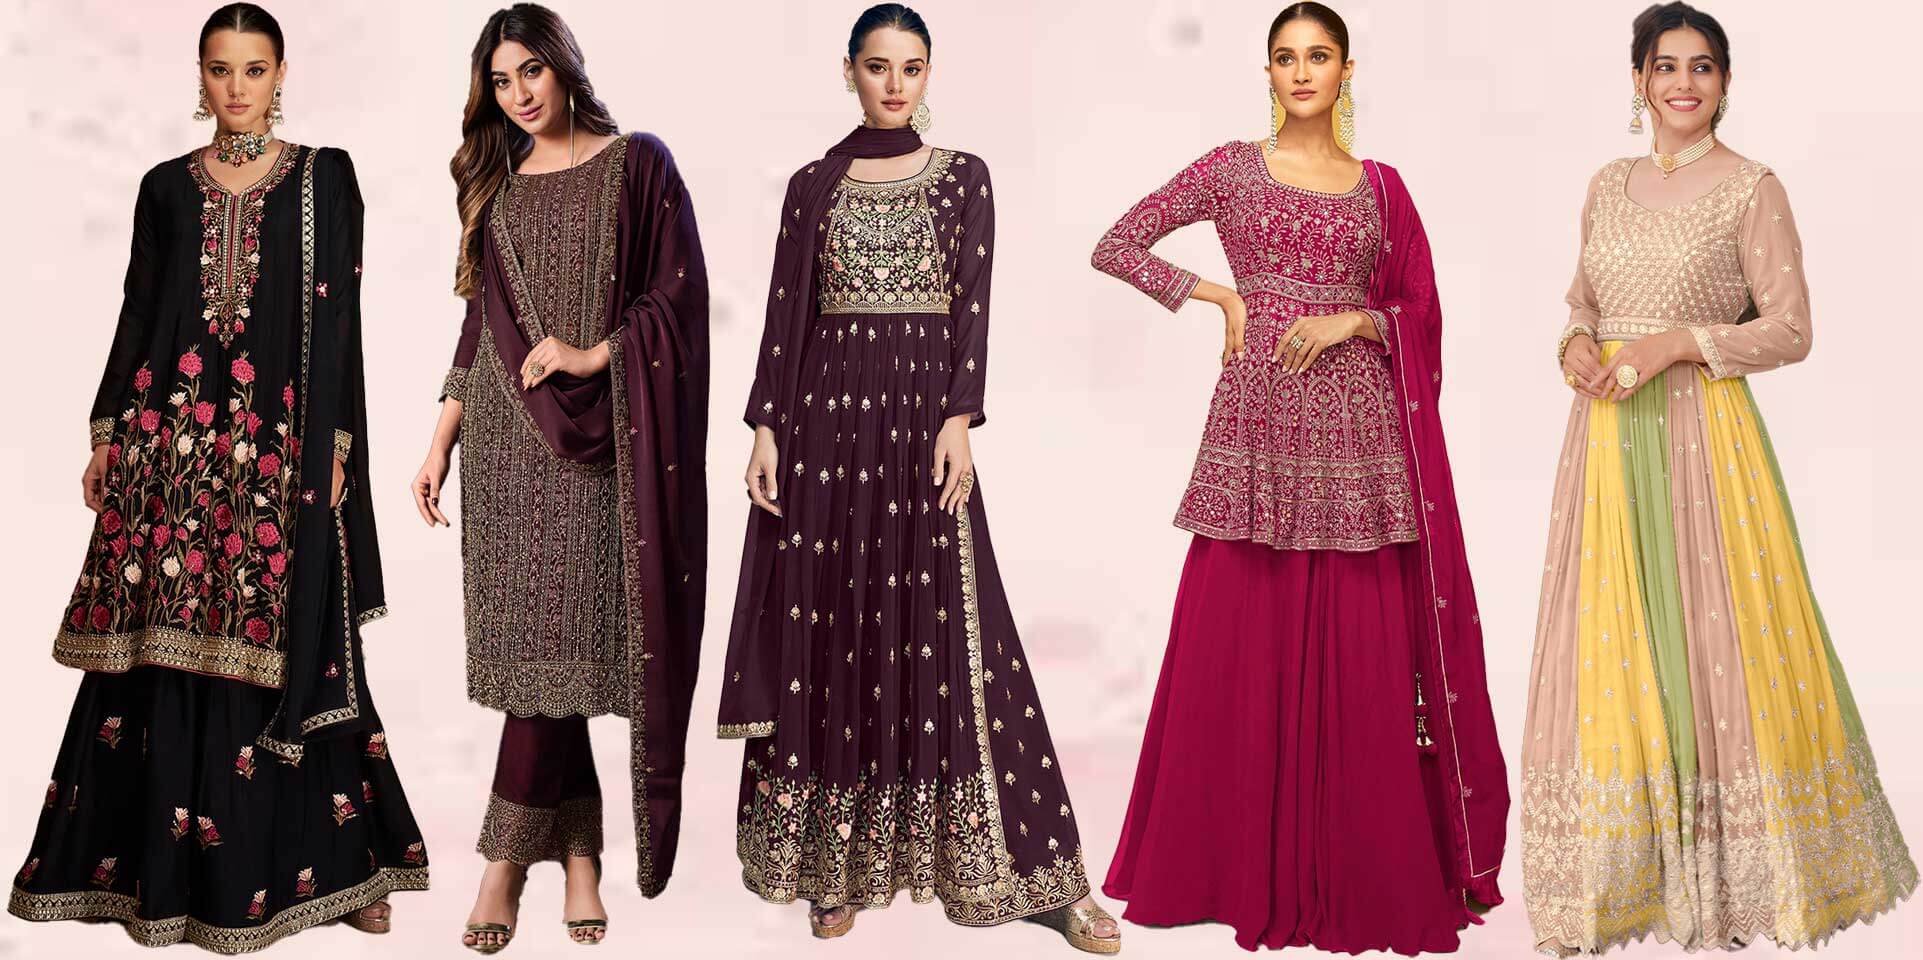 What is the History, Significance, and Alternate Names of Salwar Kameez?